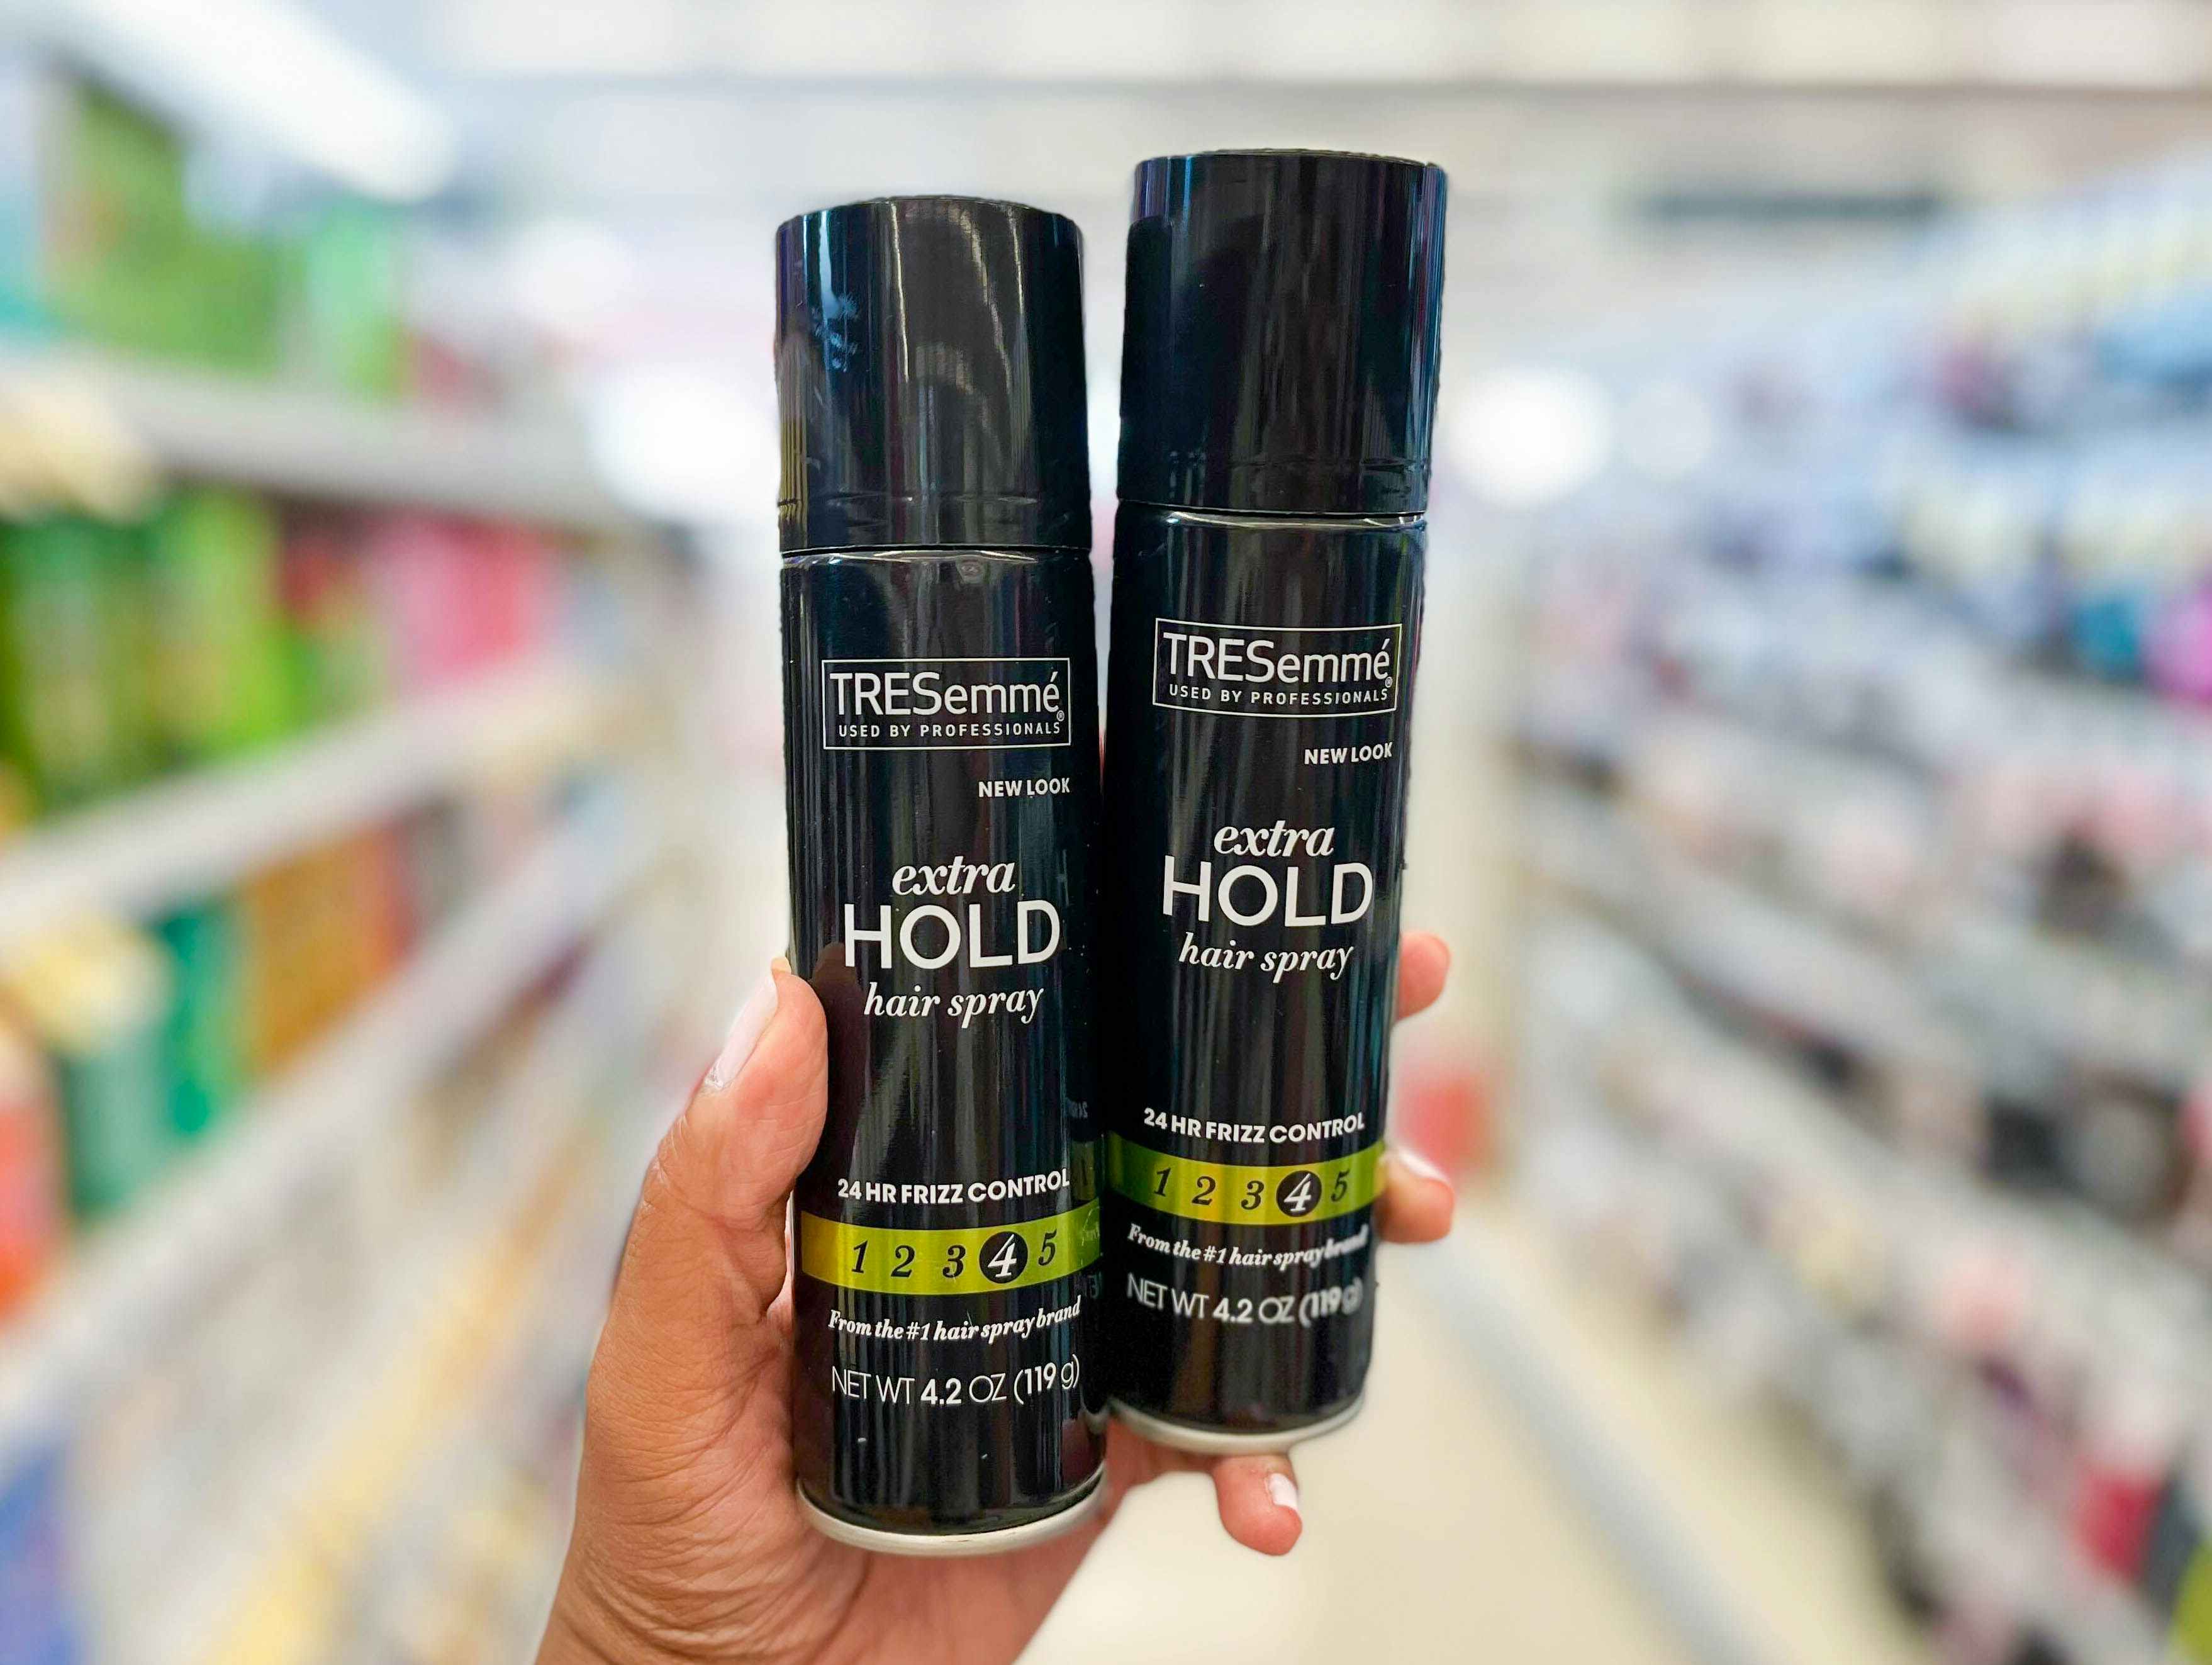 hand holding two cans of Tresemme hair spray in aisle